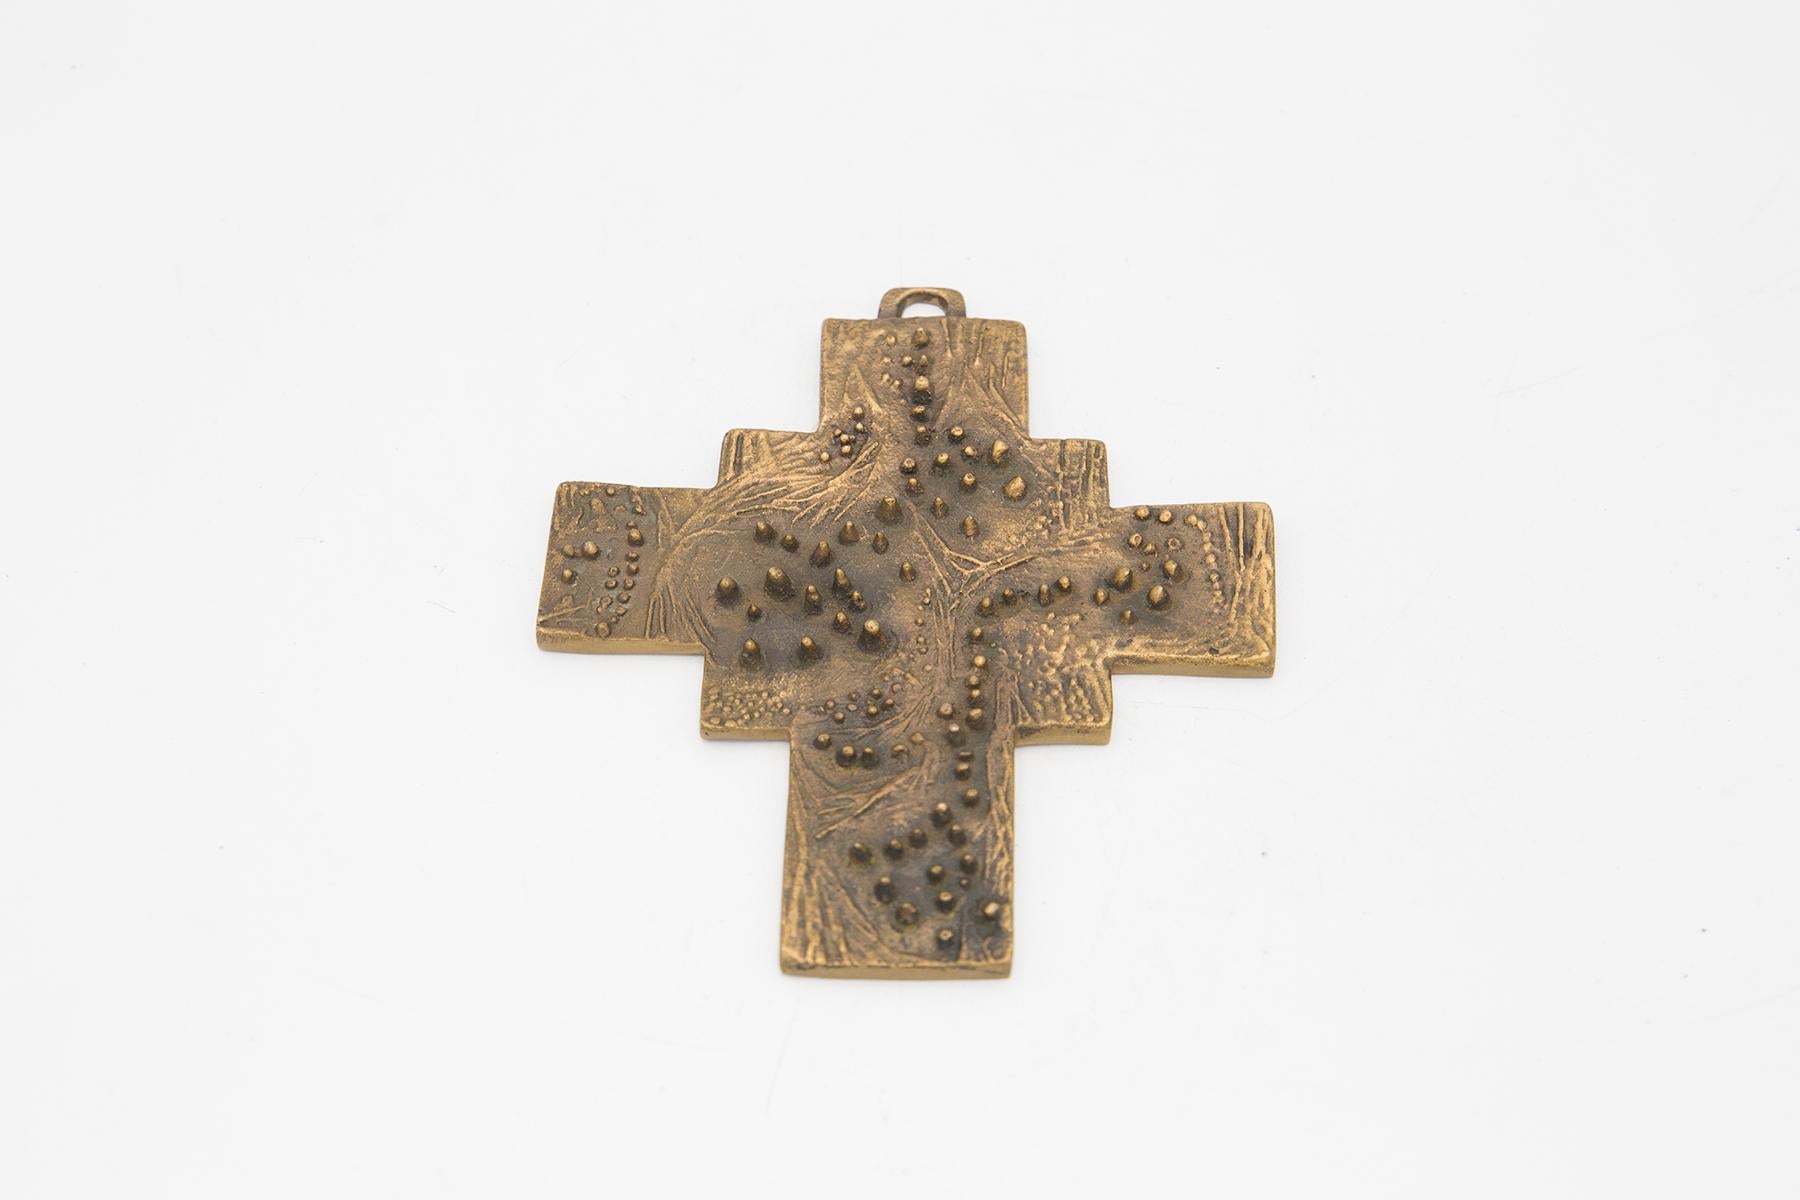 Stunning brass cross designed by Arnaldo Pomodoro and his brother Giò Pomodoro in the 1950s, of fine Italian manufacture. It is part of the V/58/16 model.
The cross is made entirely of brass, of superhuman beauty. The cross has a fairly classical